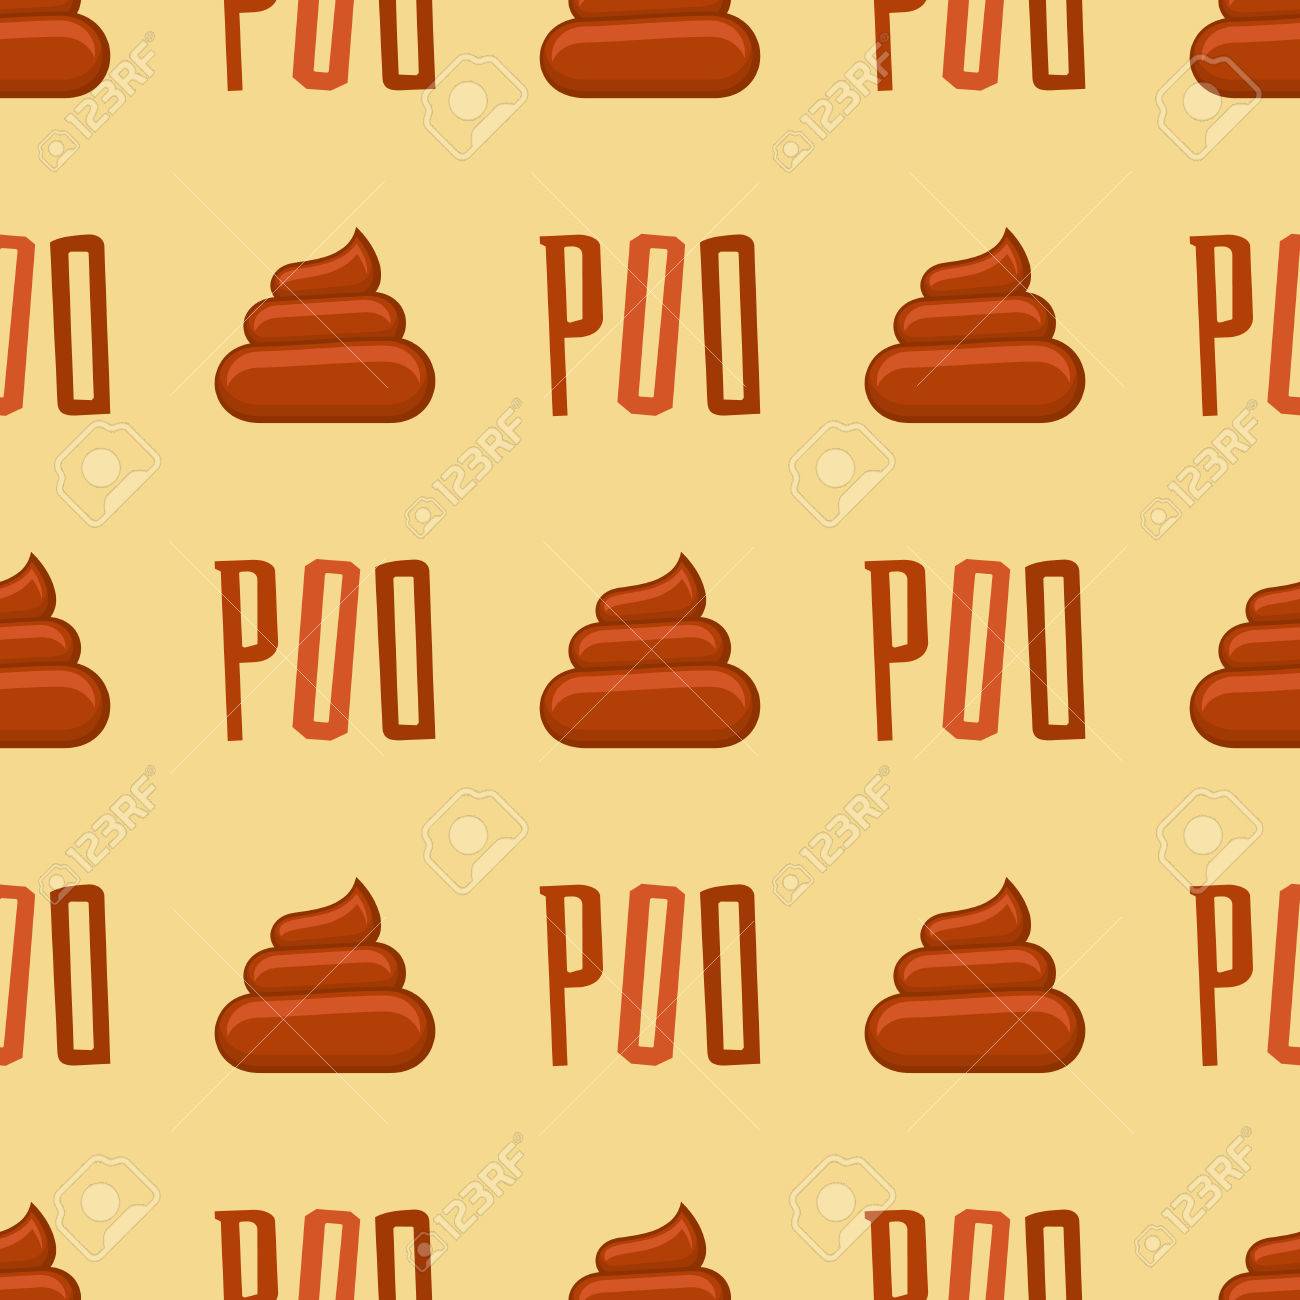 Poo Vintage Colors Seamless Pattern Humor Background And Cartoon